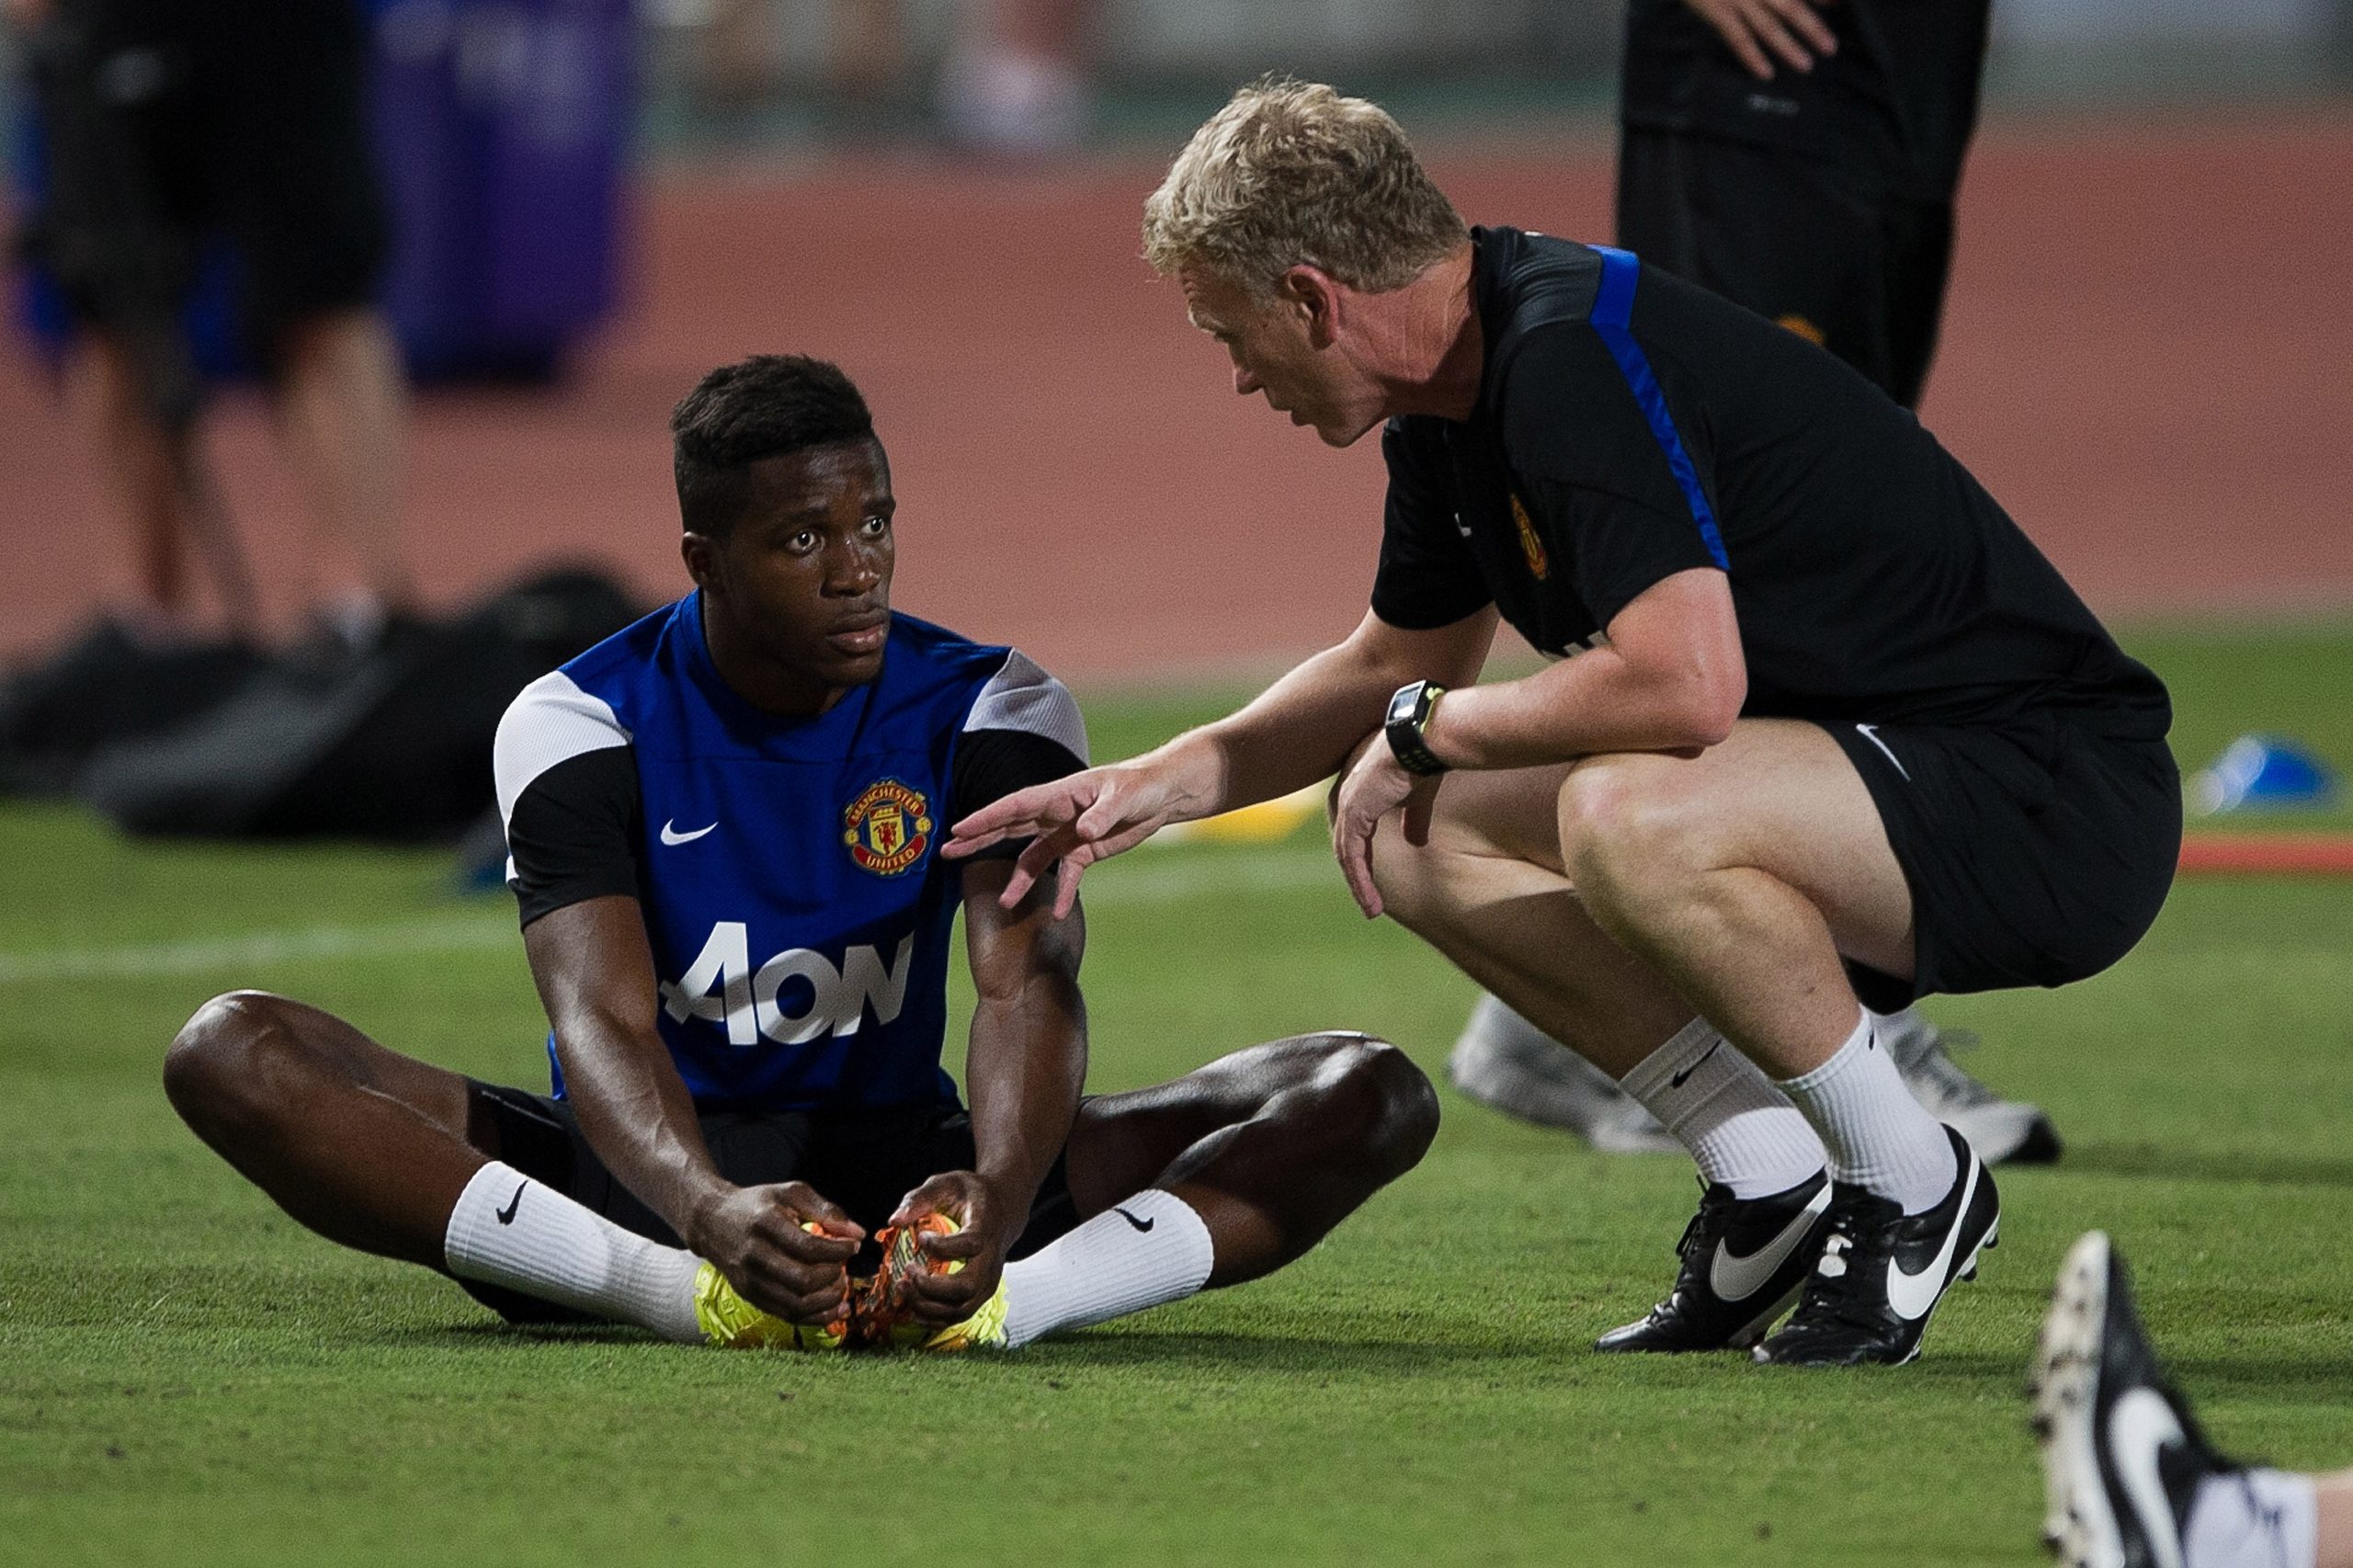 Wilfried Zaha says he regrets not expressing his personality at Manchester United under David Moyes. (GETTY Images)